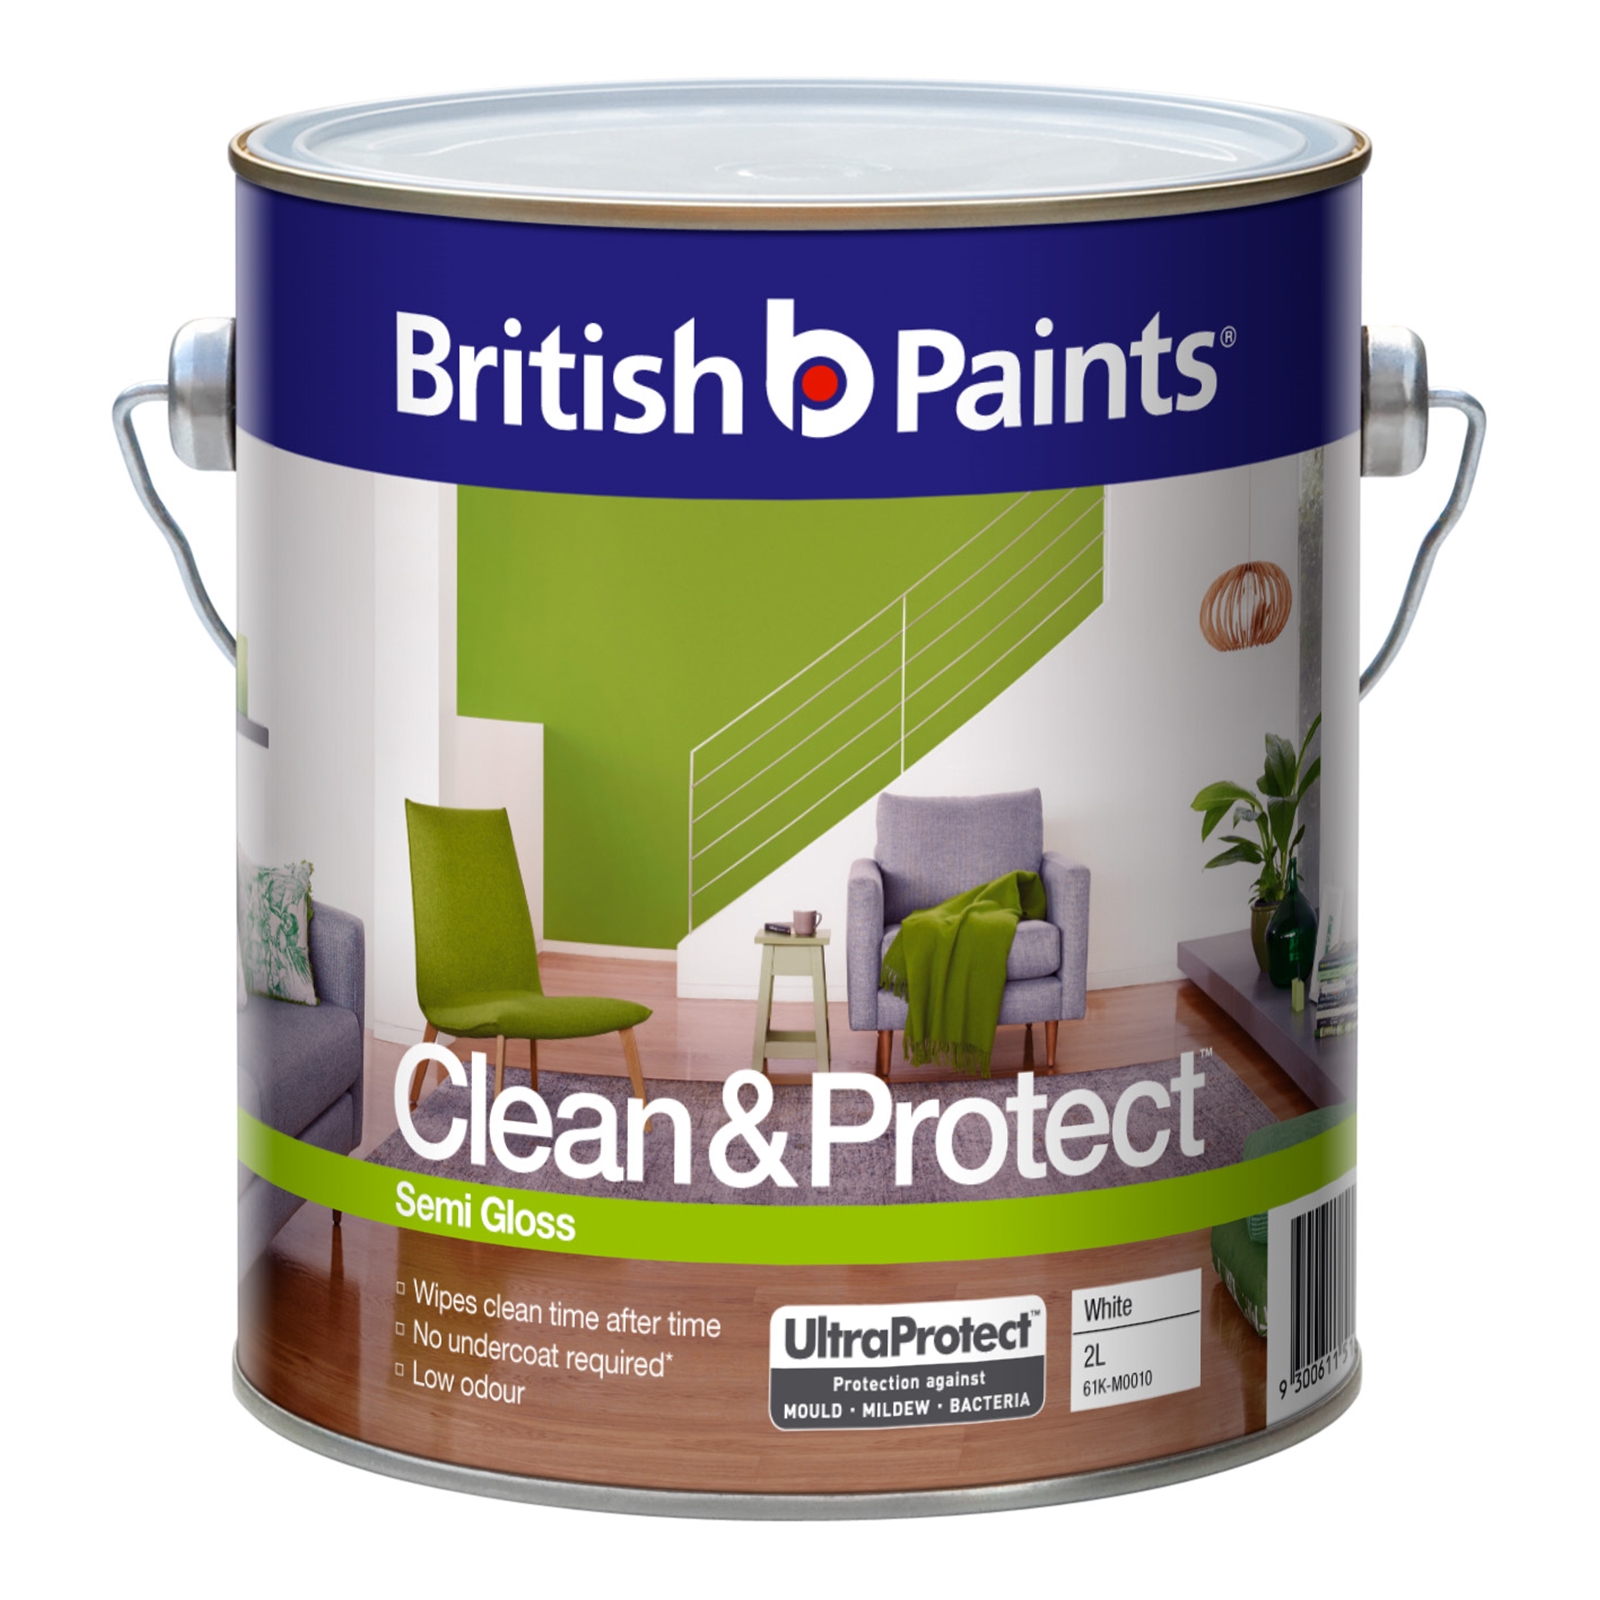 British Paints Clean & Protect 2L Semi Gloss White Interior Paint